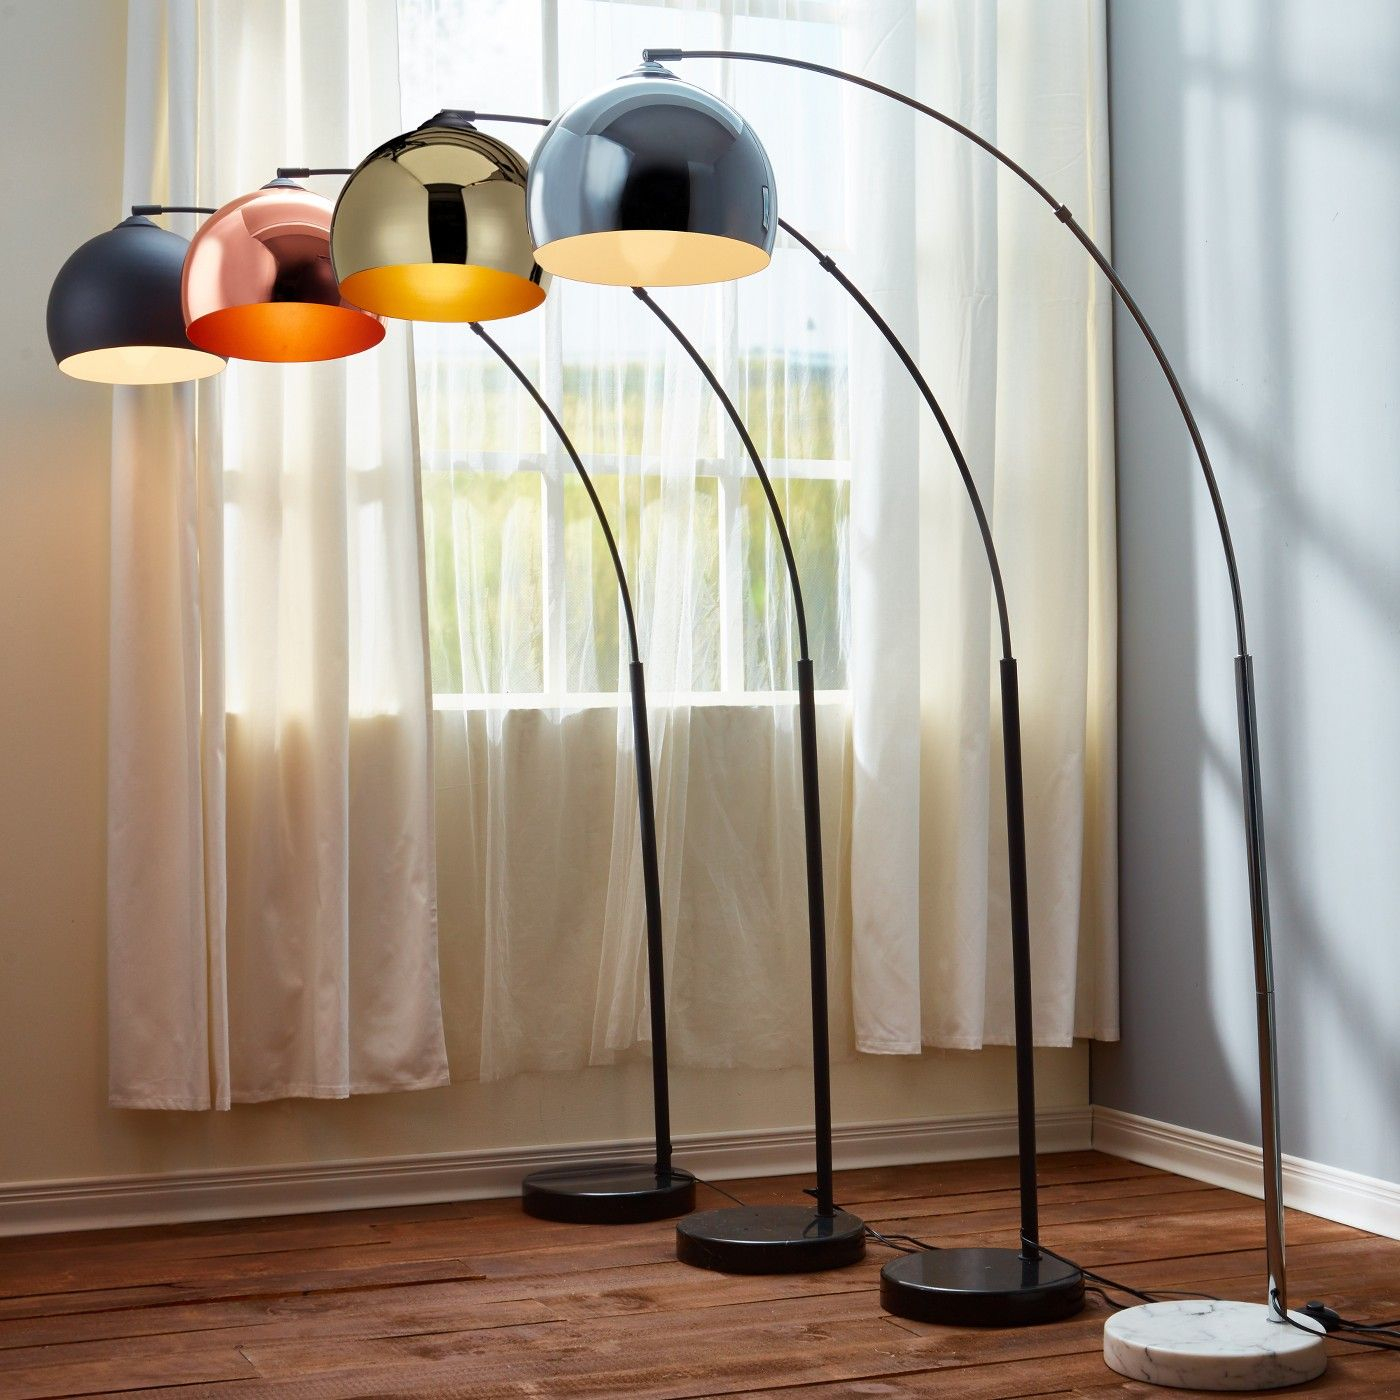 Versanora Arquer Arc Floor Lamp With Chrome Finished Shade regarding proportions 1400 X 1400